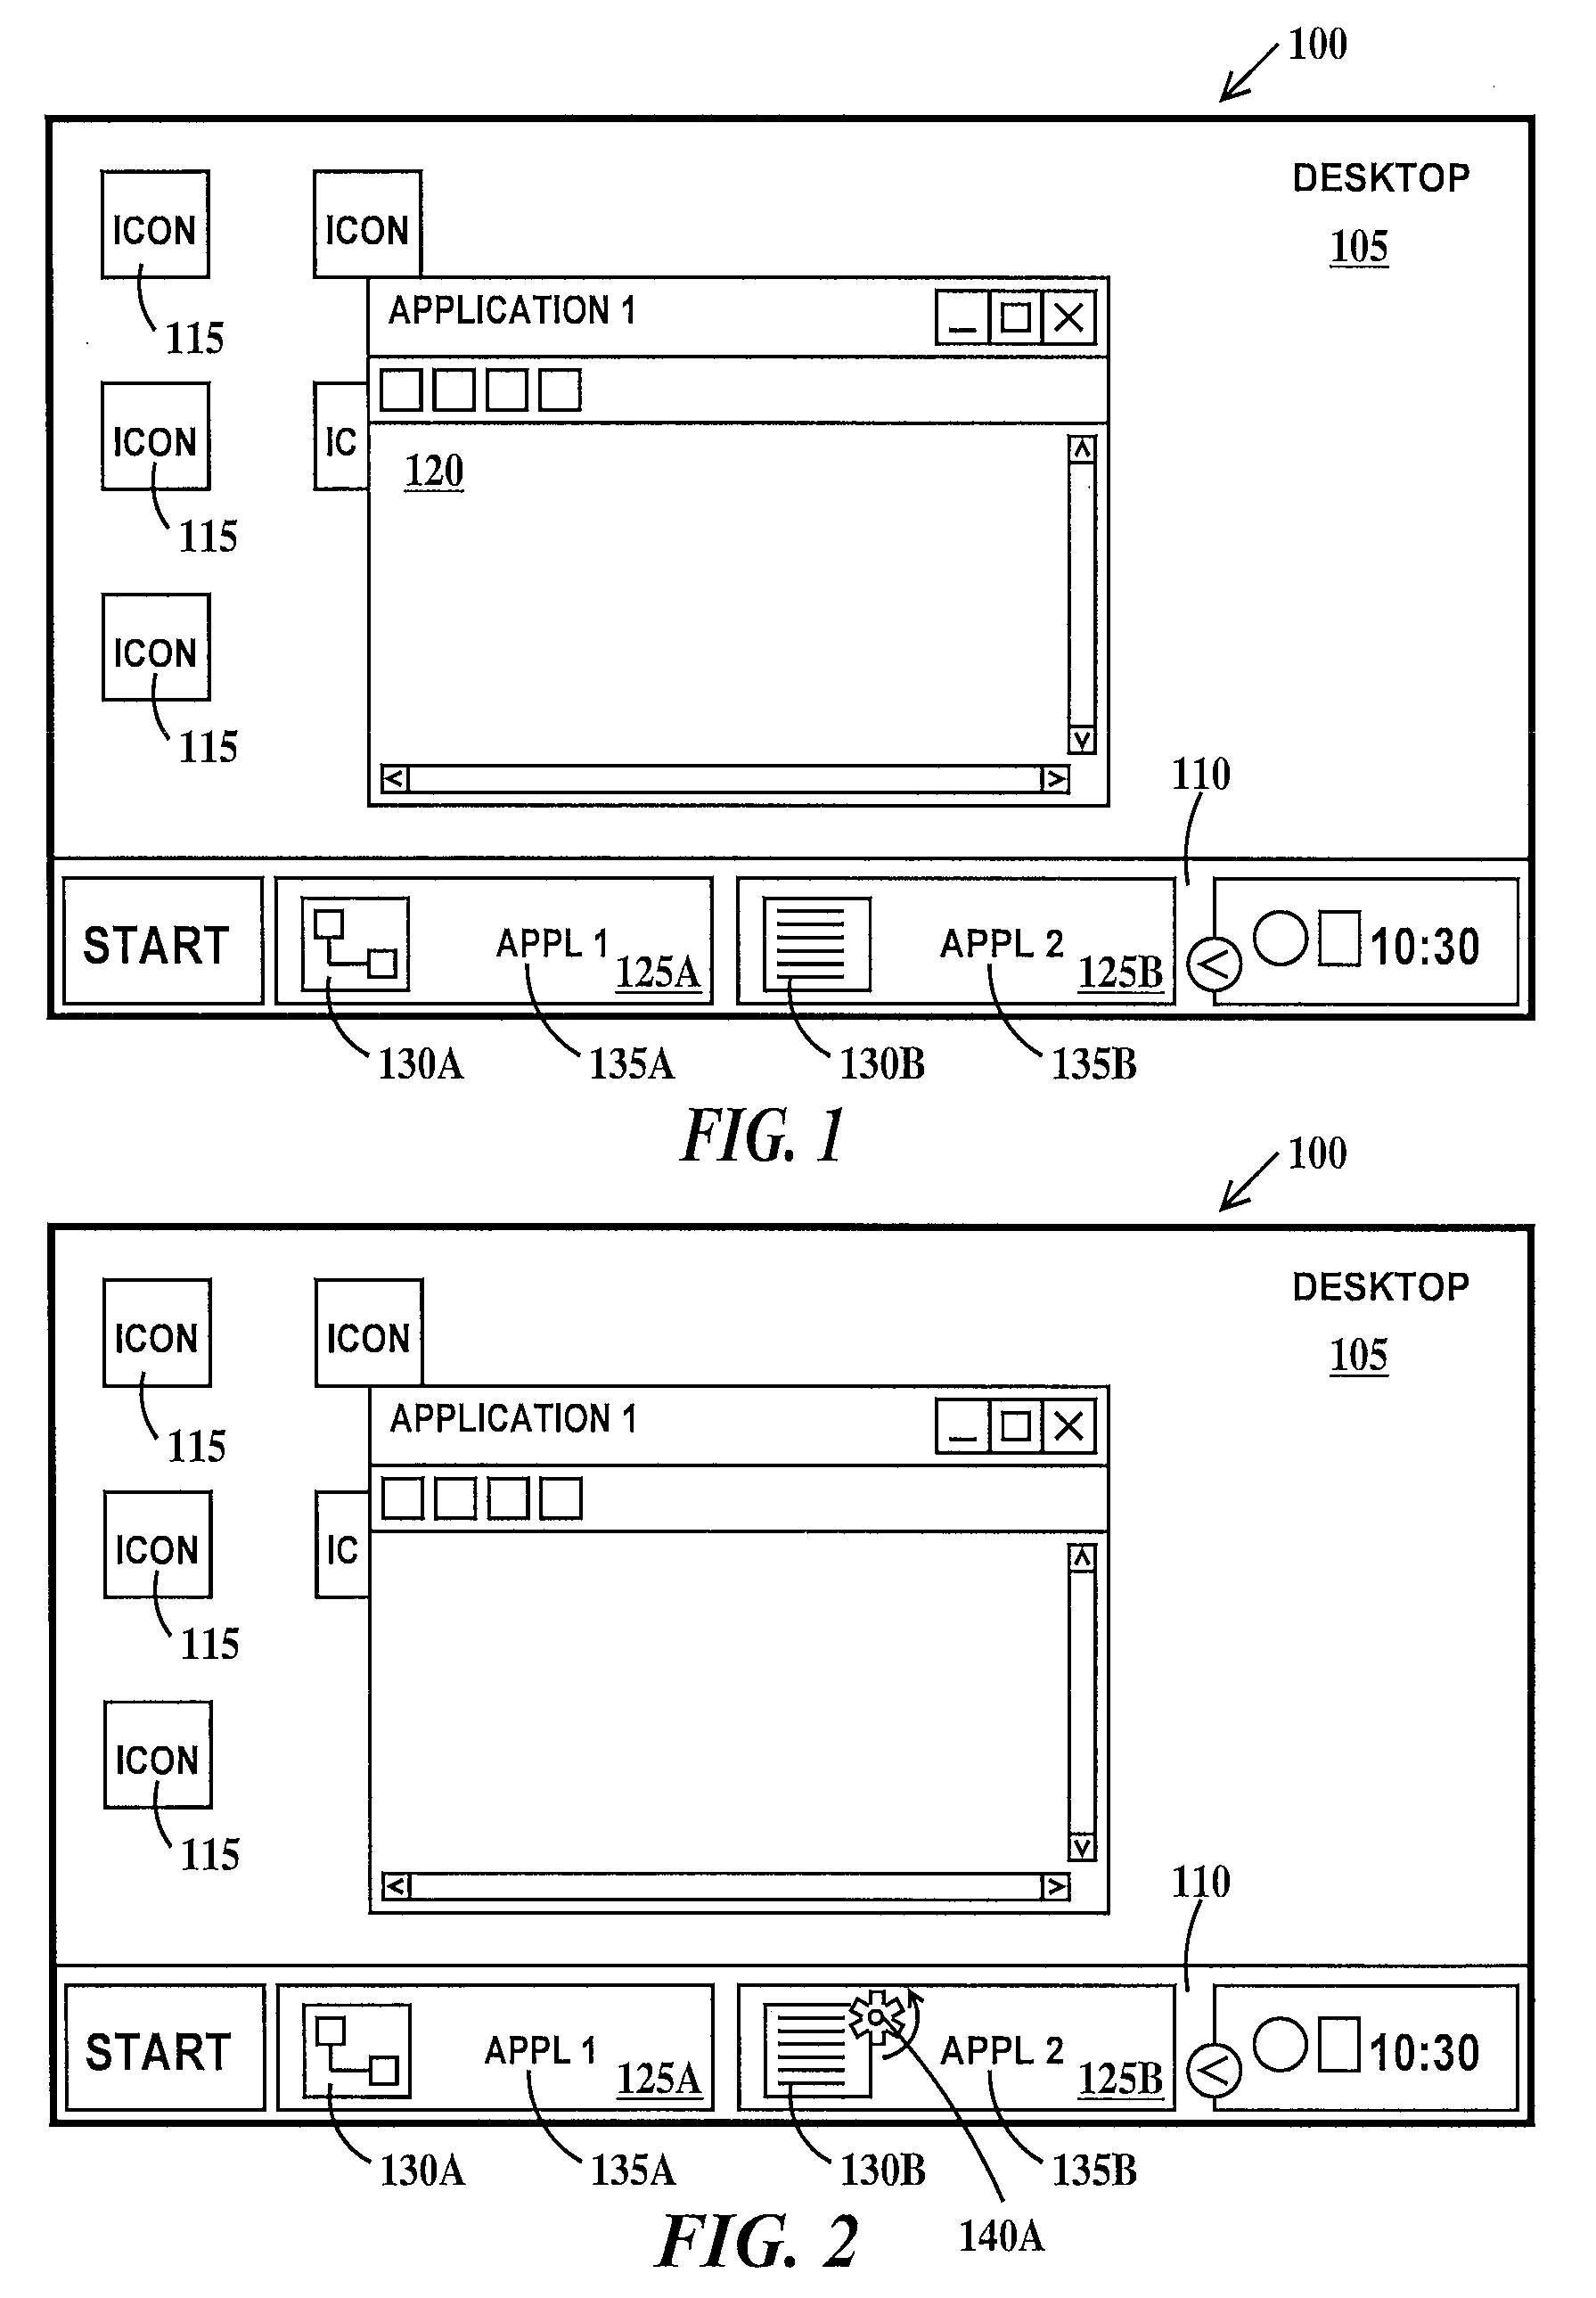 Notification of state transition of an out-of-focus application